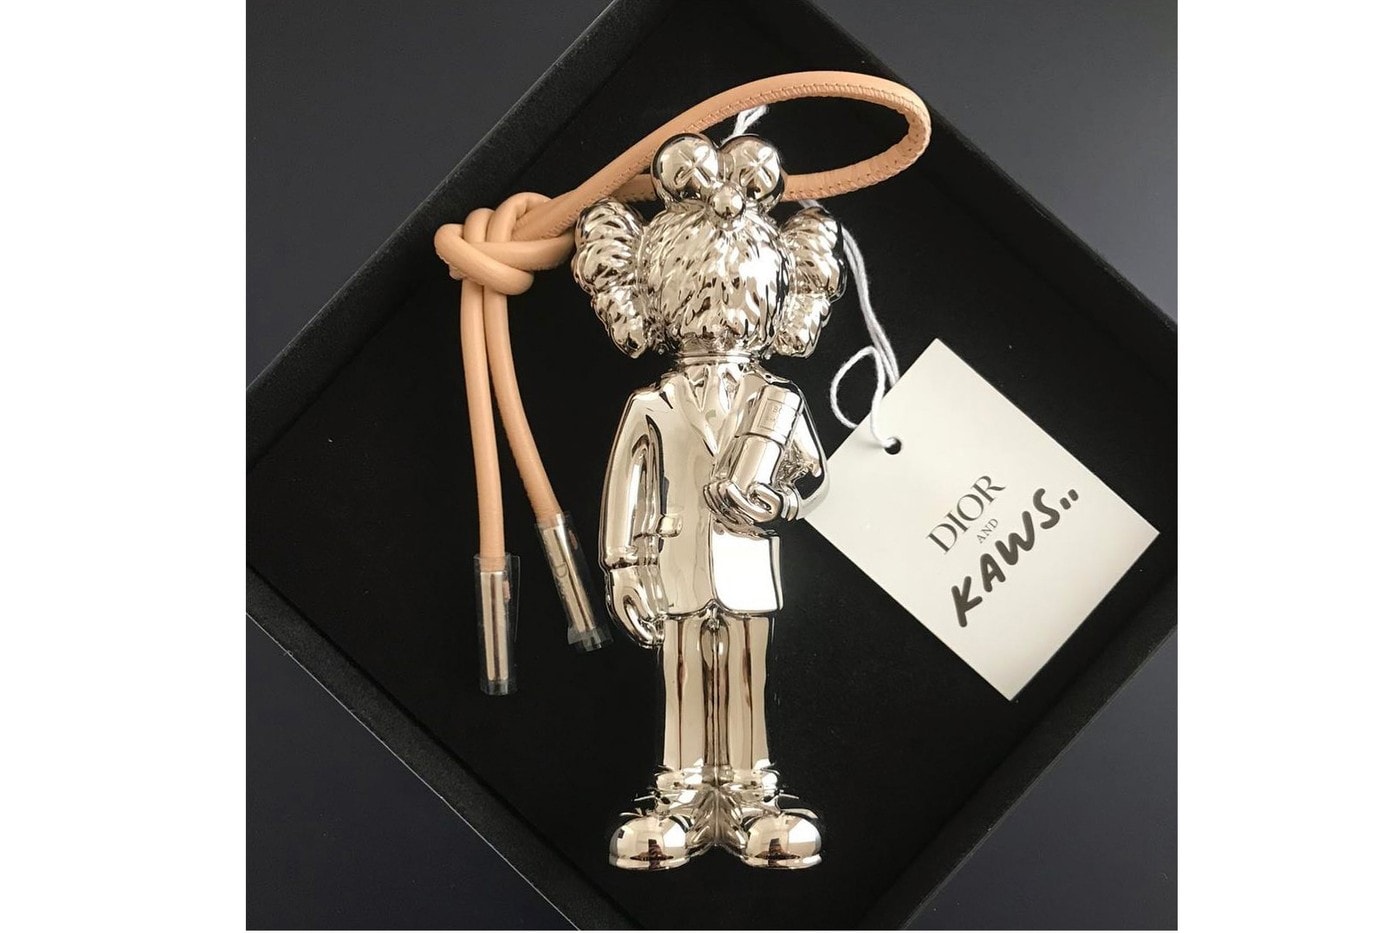 Dior KAWS Limited Edition Silver BFF Perfume Case Release Kim Jones Figure Exclusive Piece Teaser Release Date Collection SS19 Spring Summer Accessory